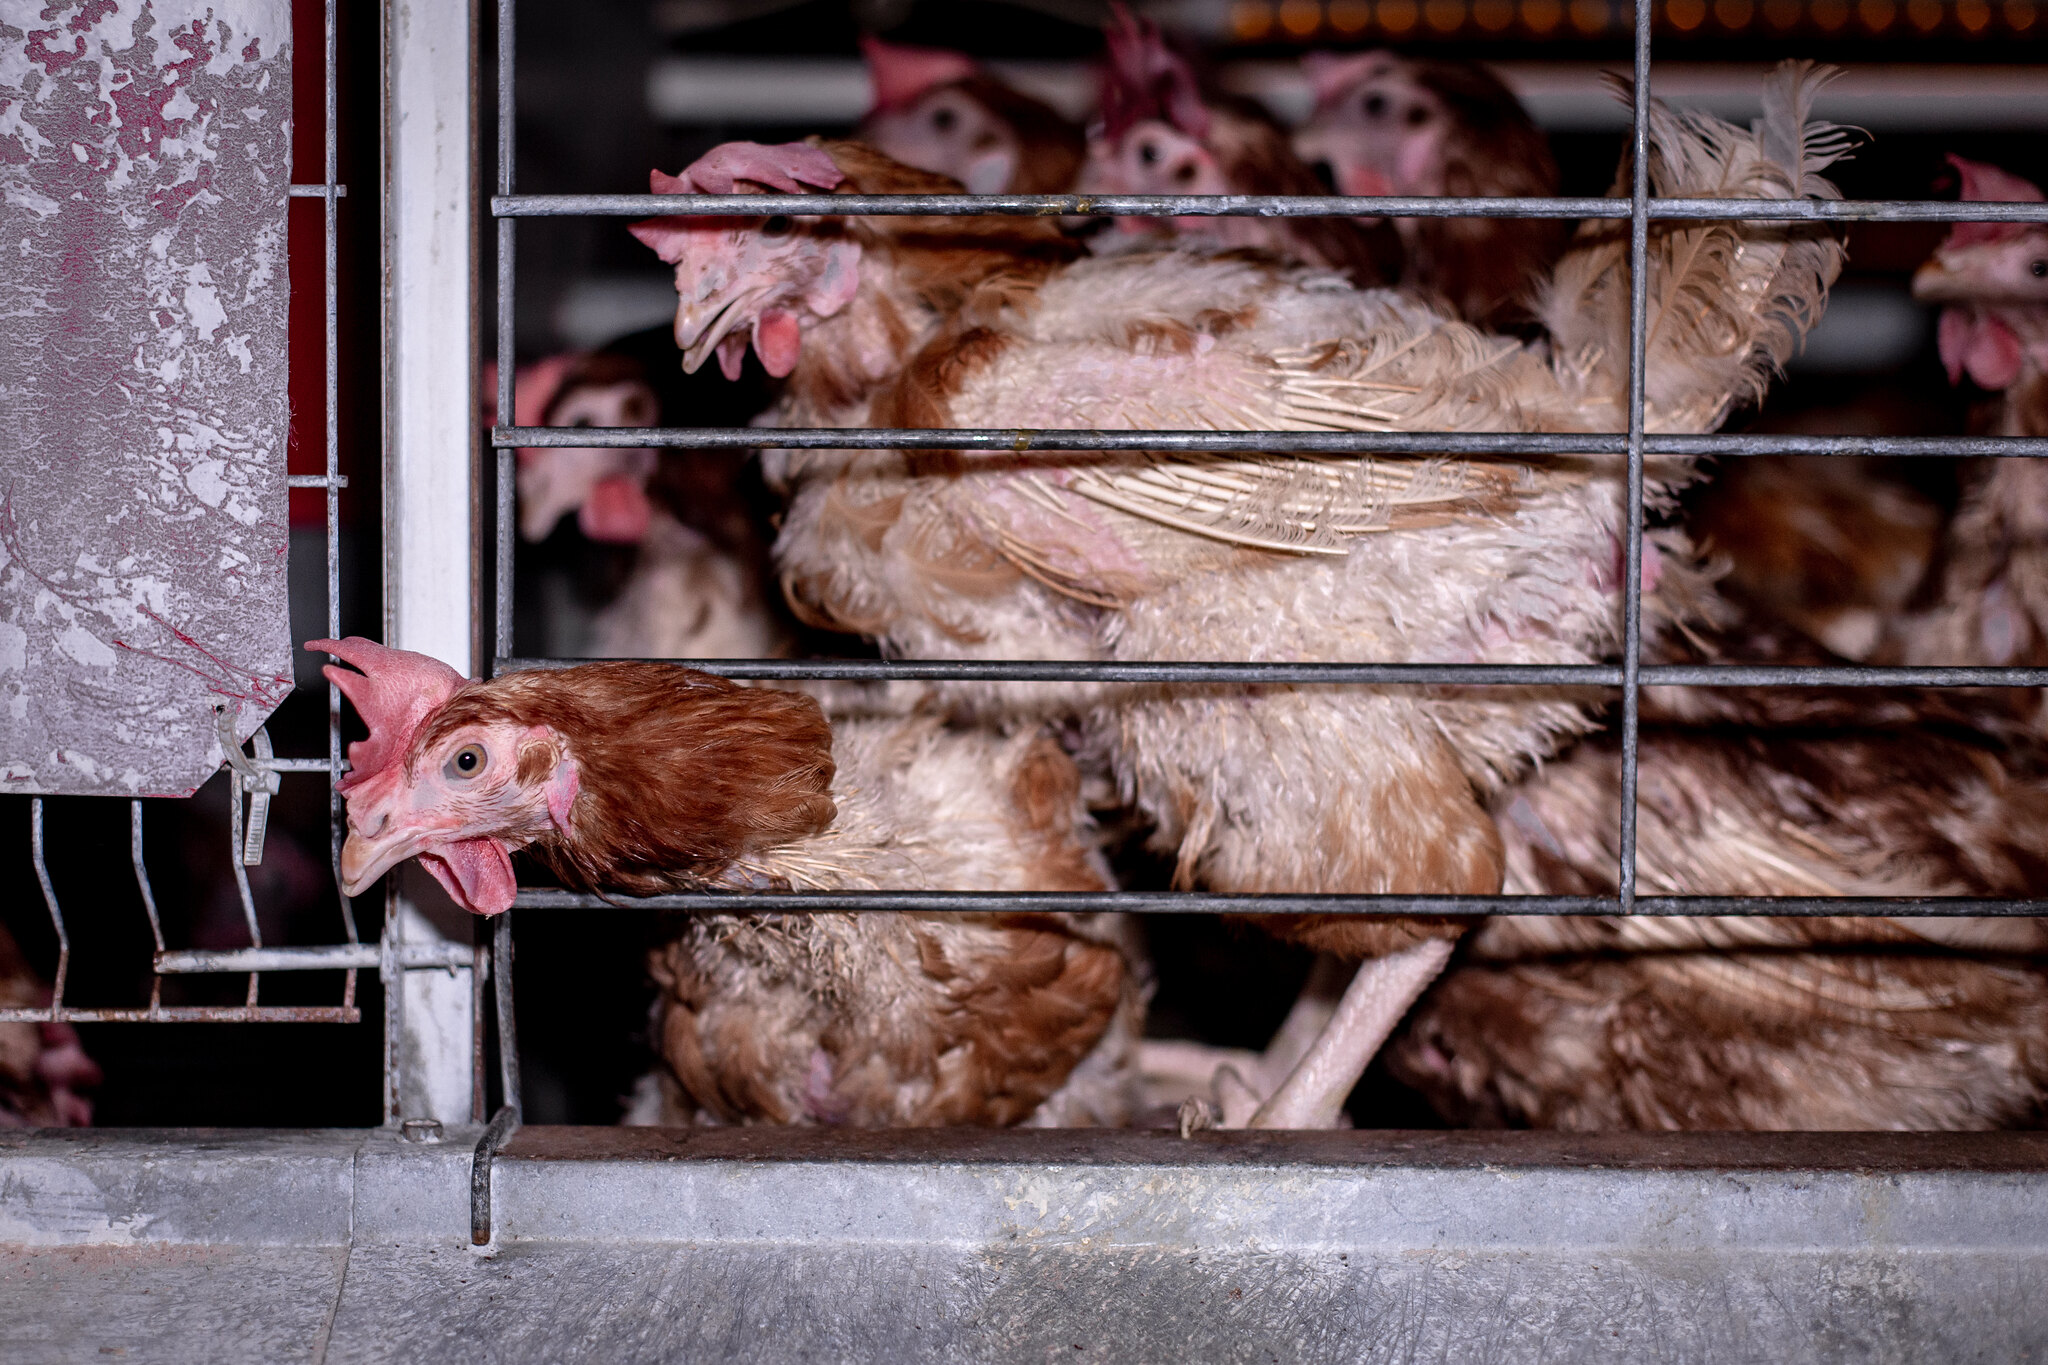 Image shows hens on factory farm